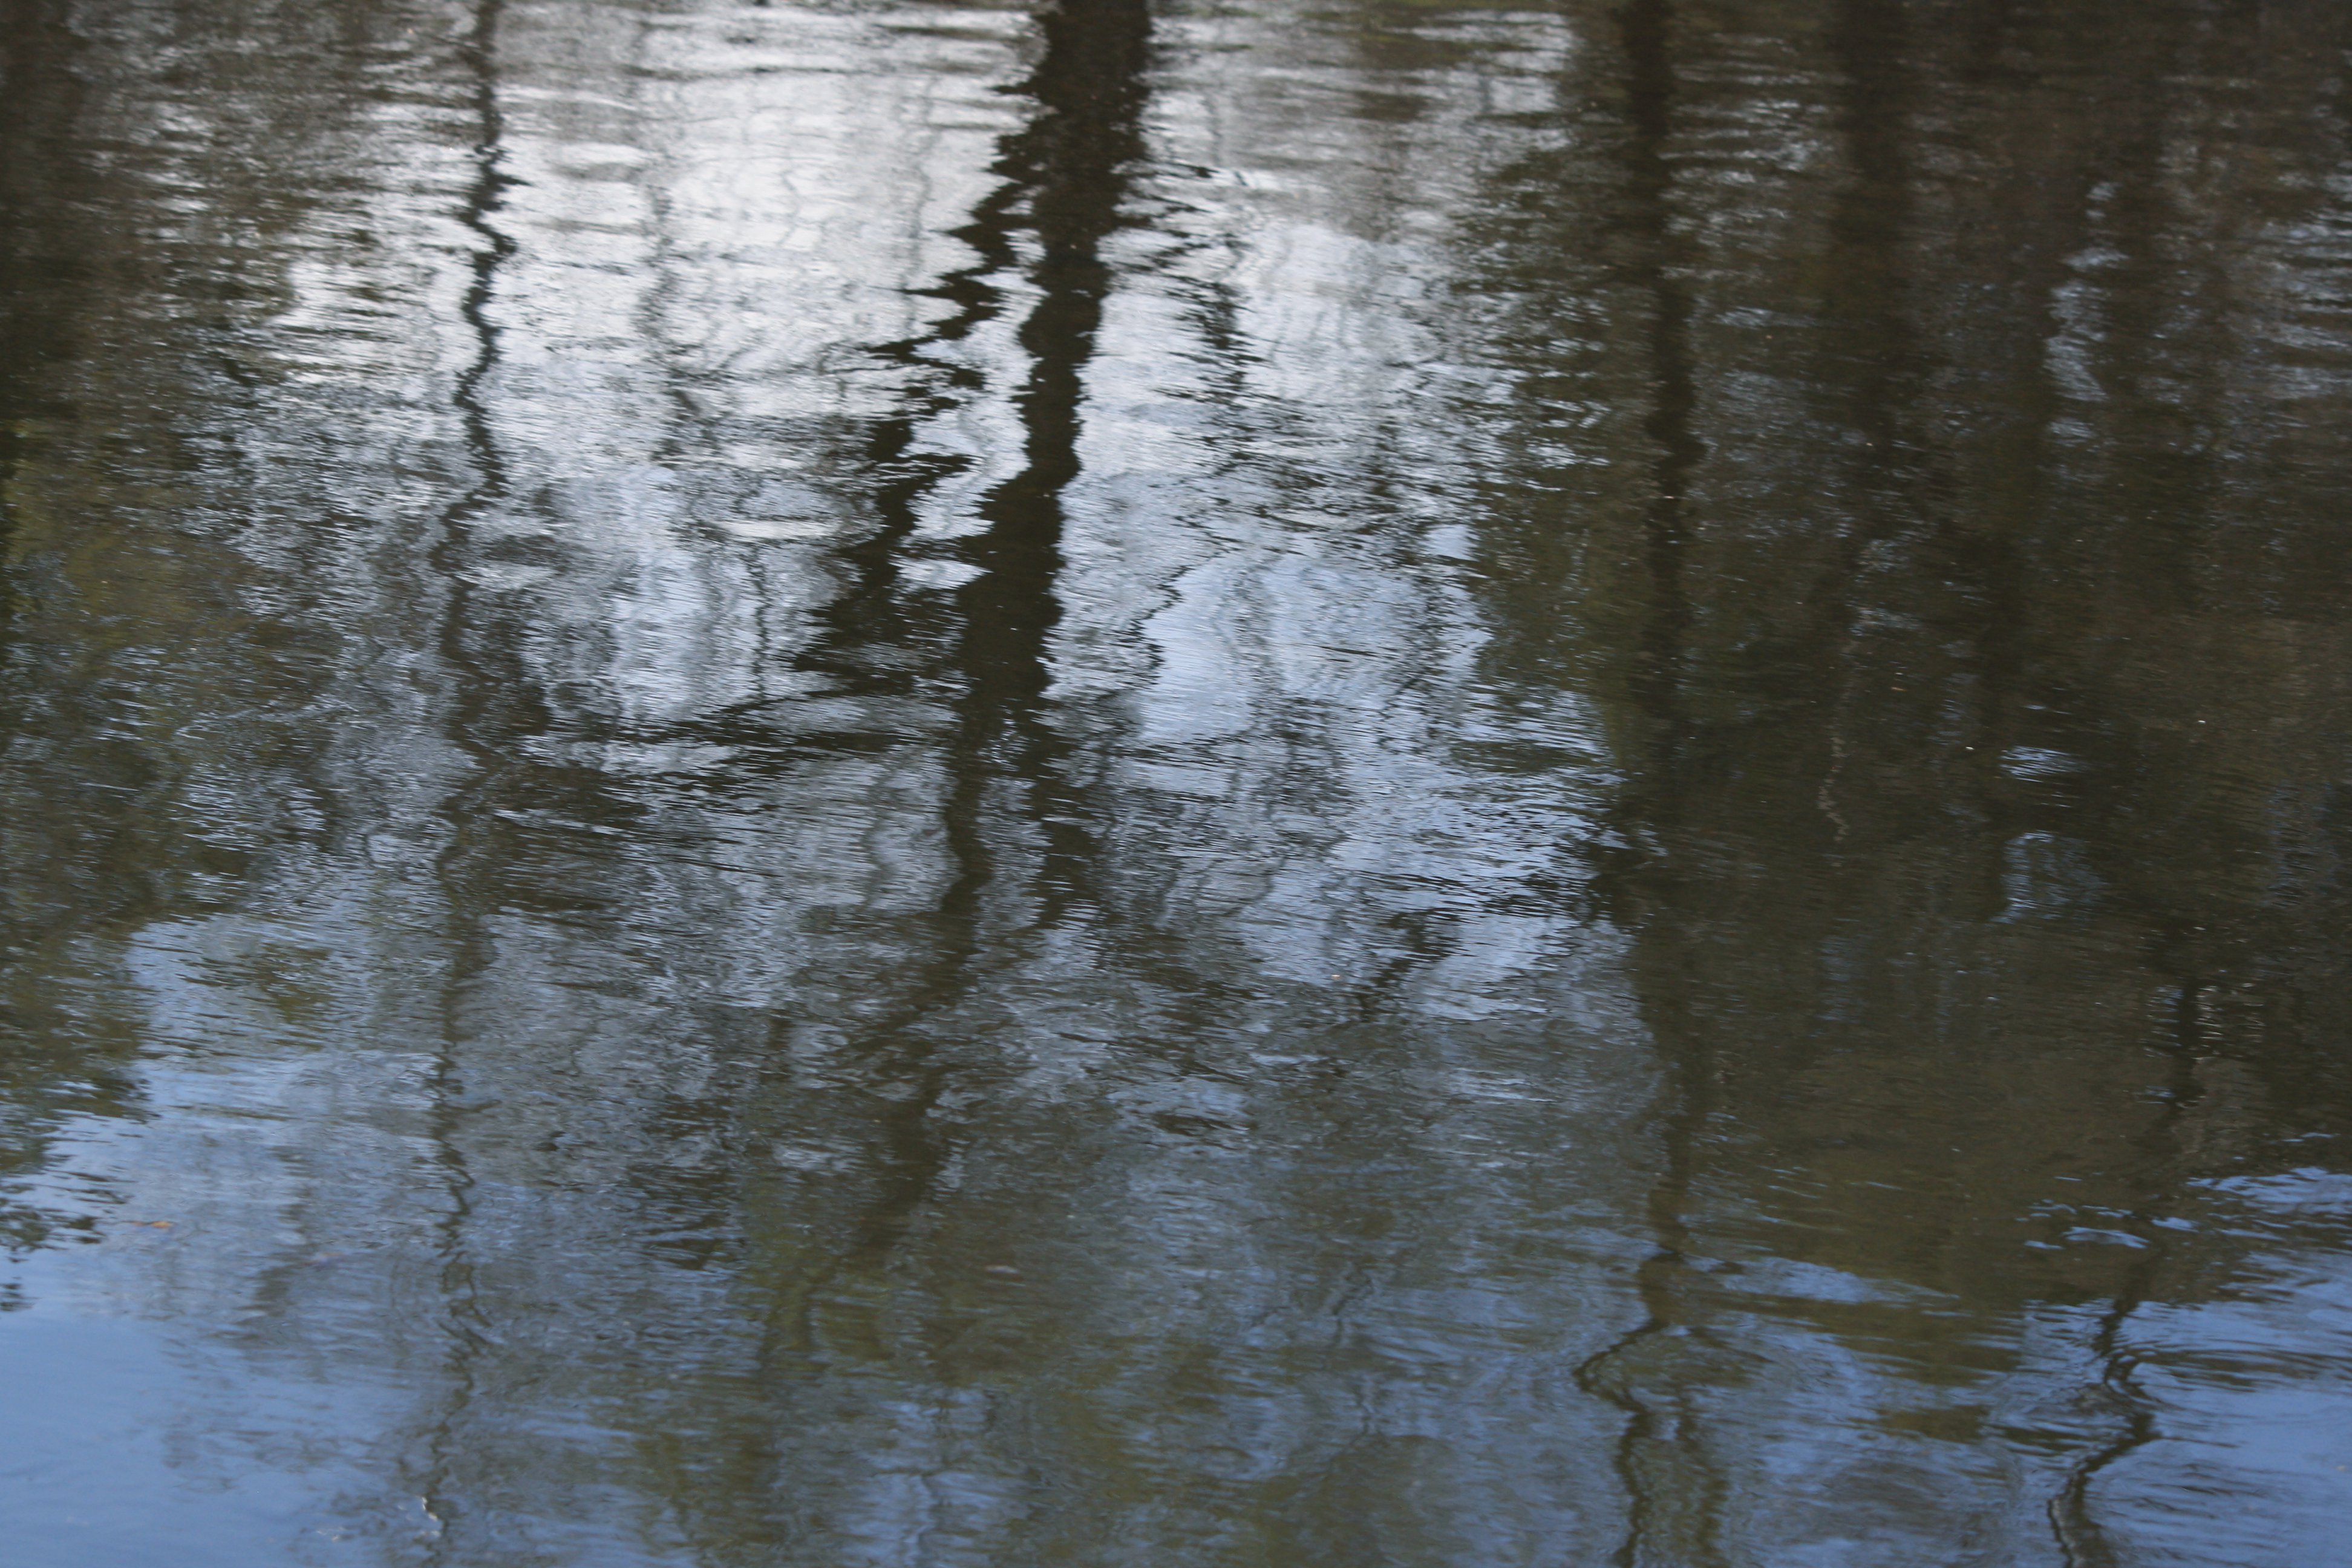 https://www.photos-public-domain.com/wp-content/uploads/2012/04/tree-reflections-in-river-water.jpg